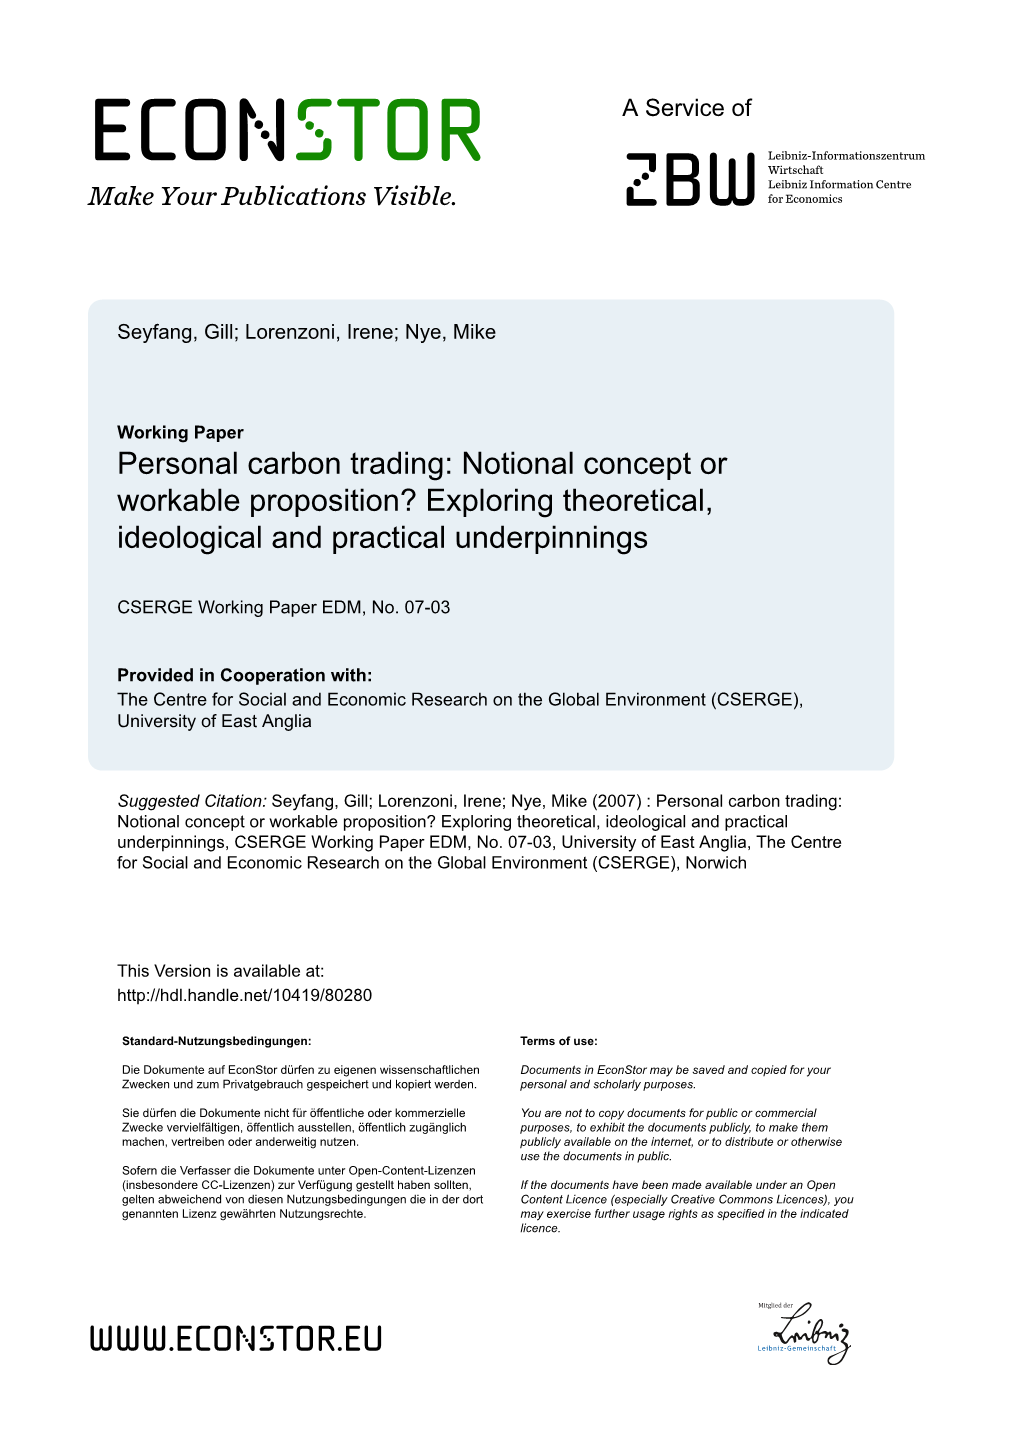 Personal Carbon Trading: Notional Concept Or Workable Proposition? Exploring Theoretical, Ideological and Practical Underpinnings